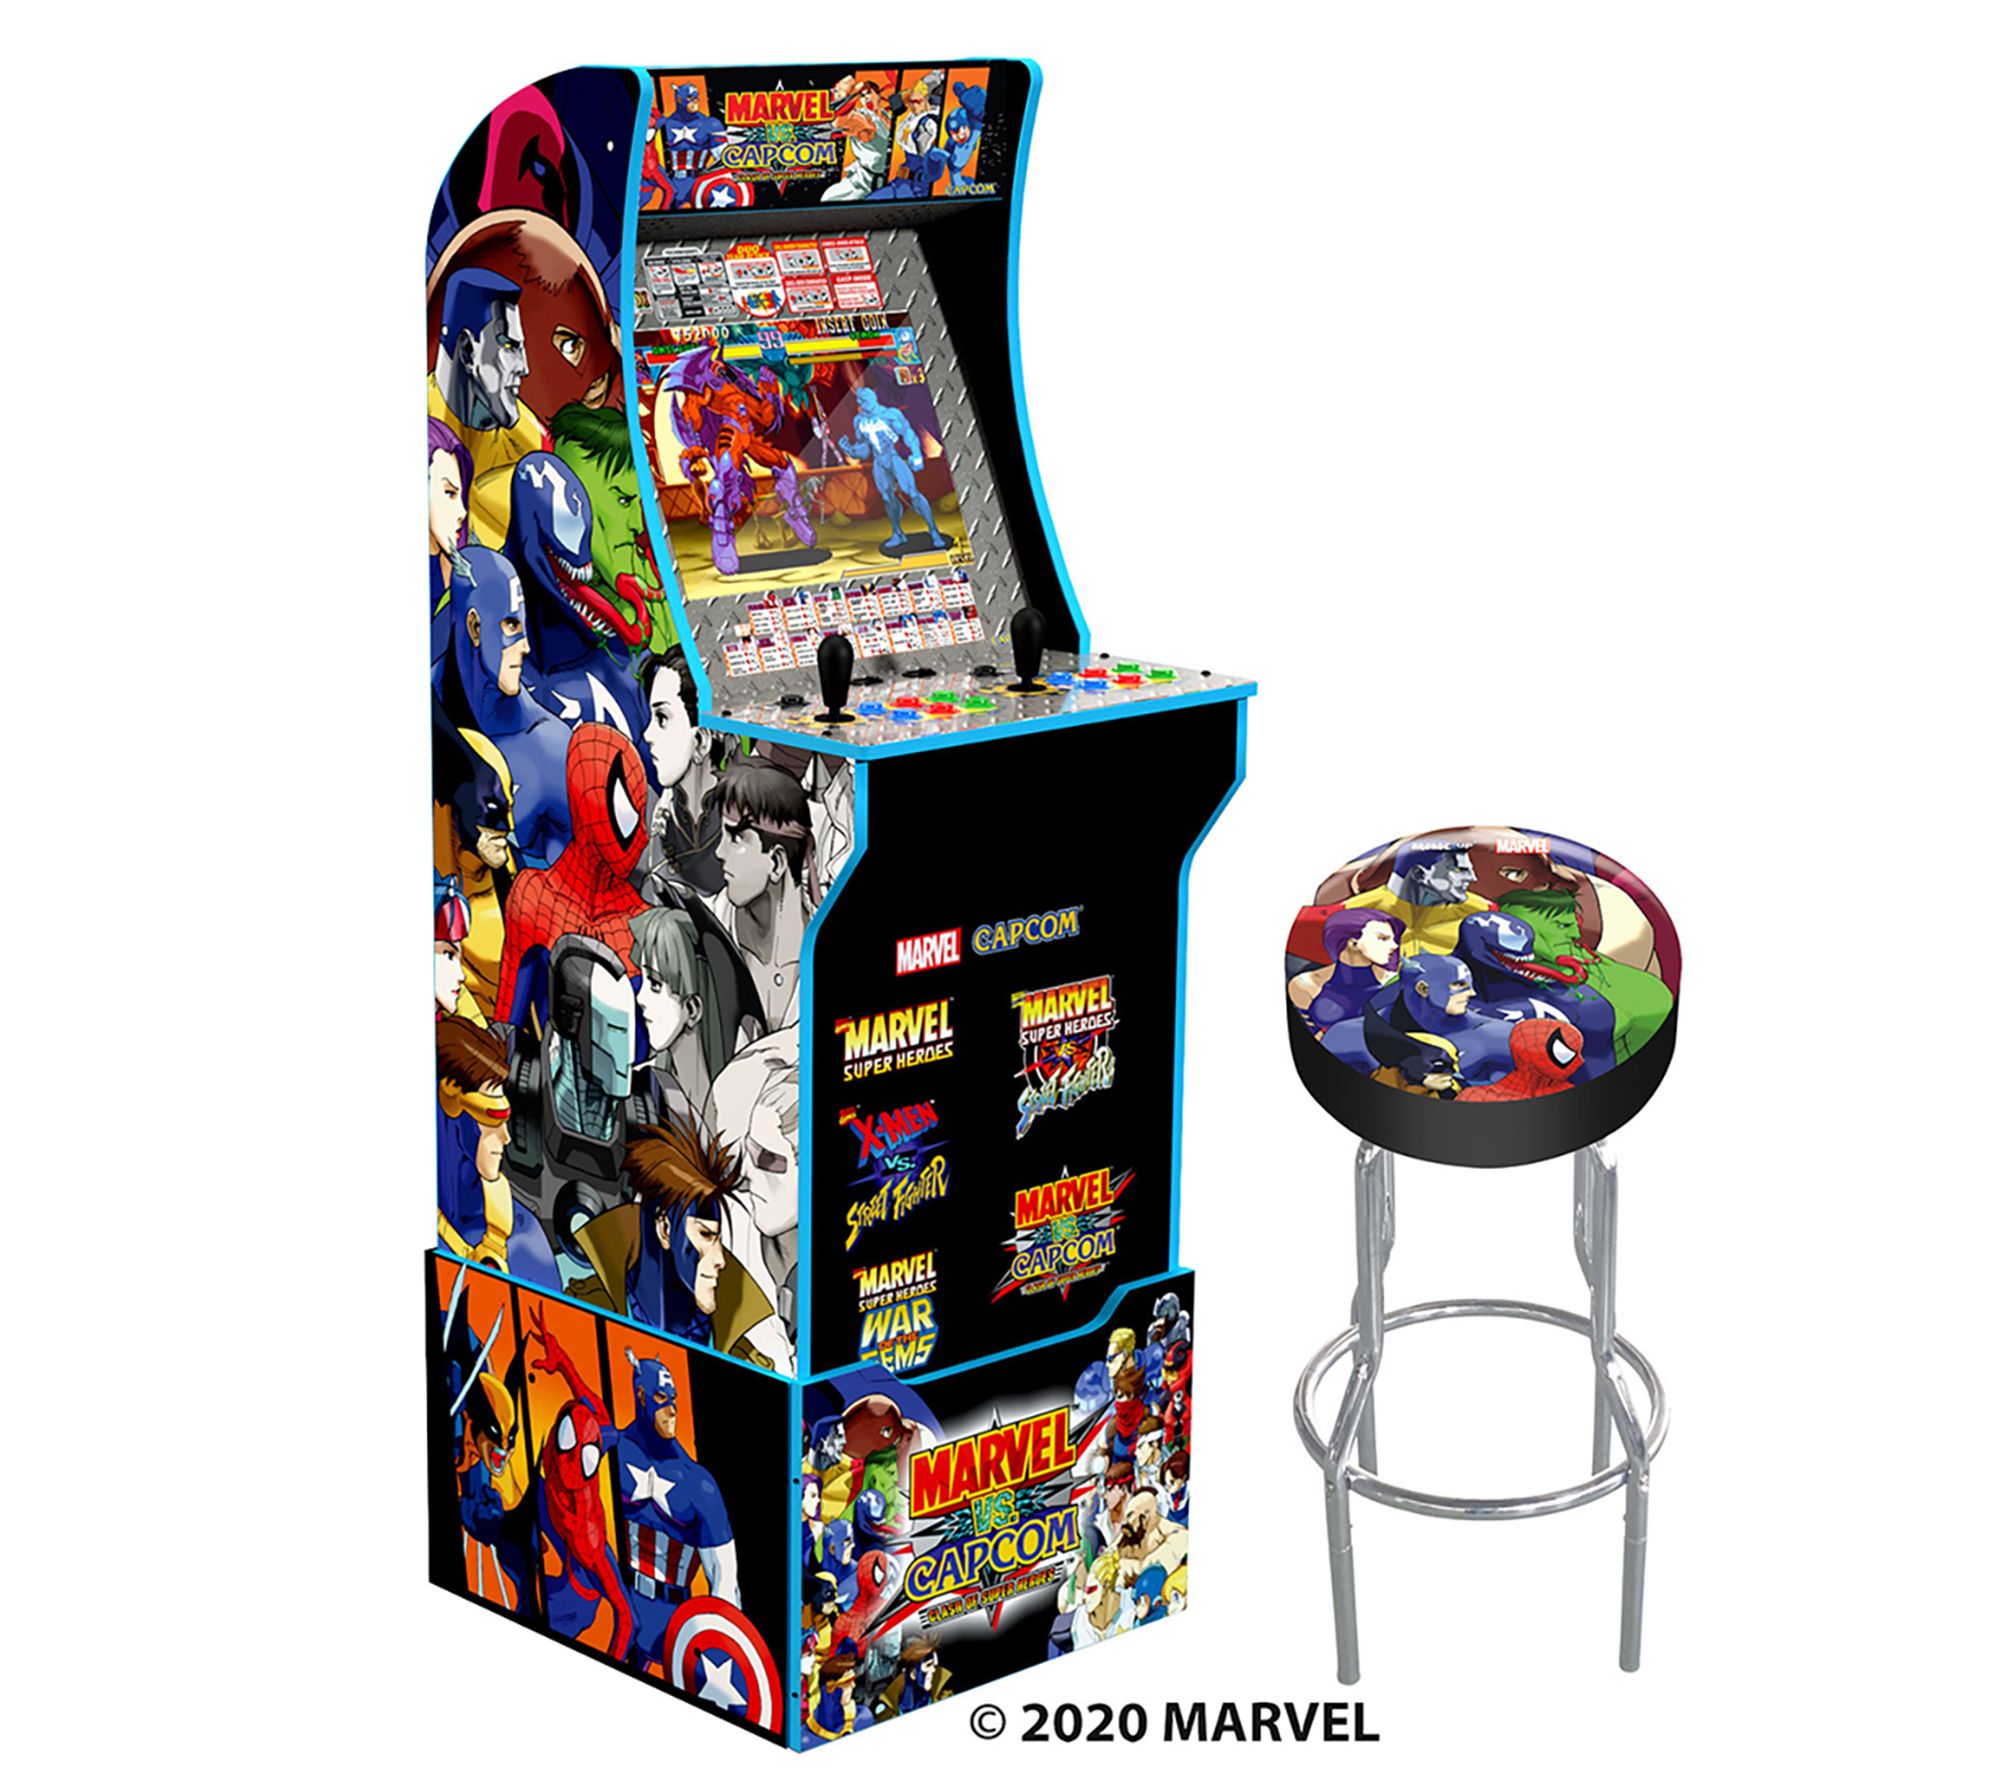  Arcade 1Up Arcade1Up Marvel Super Heroes 2 Player Countercade -  Electronic Games; : Toys & Games